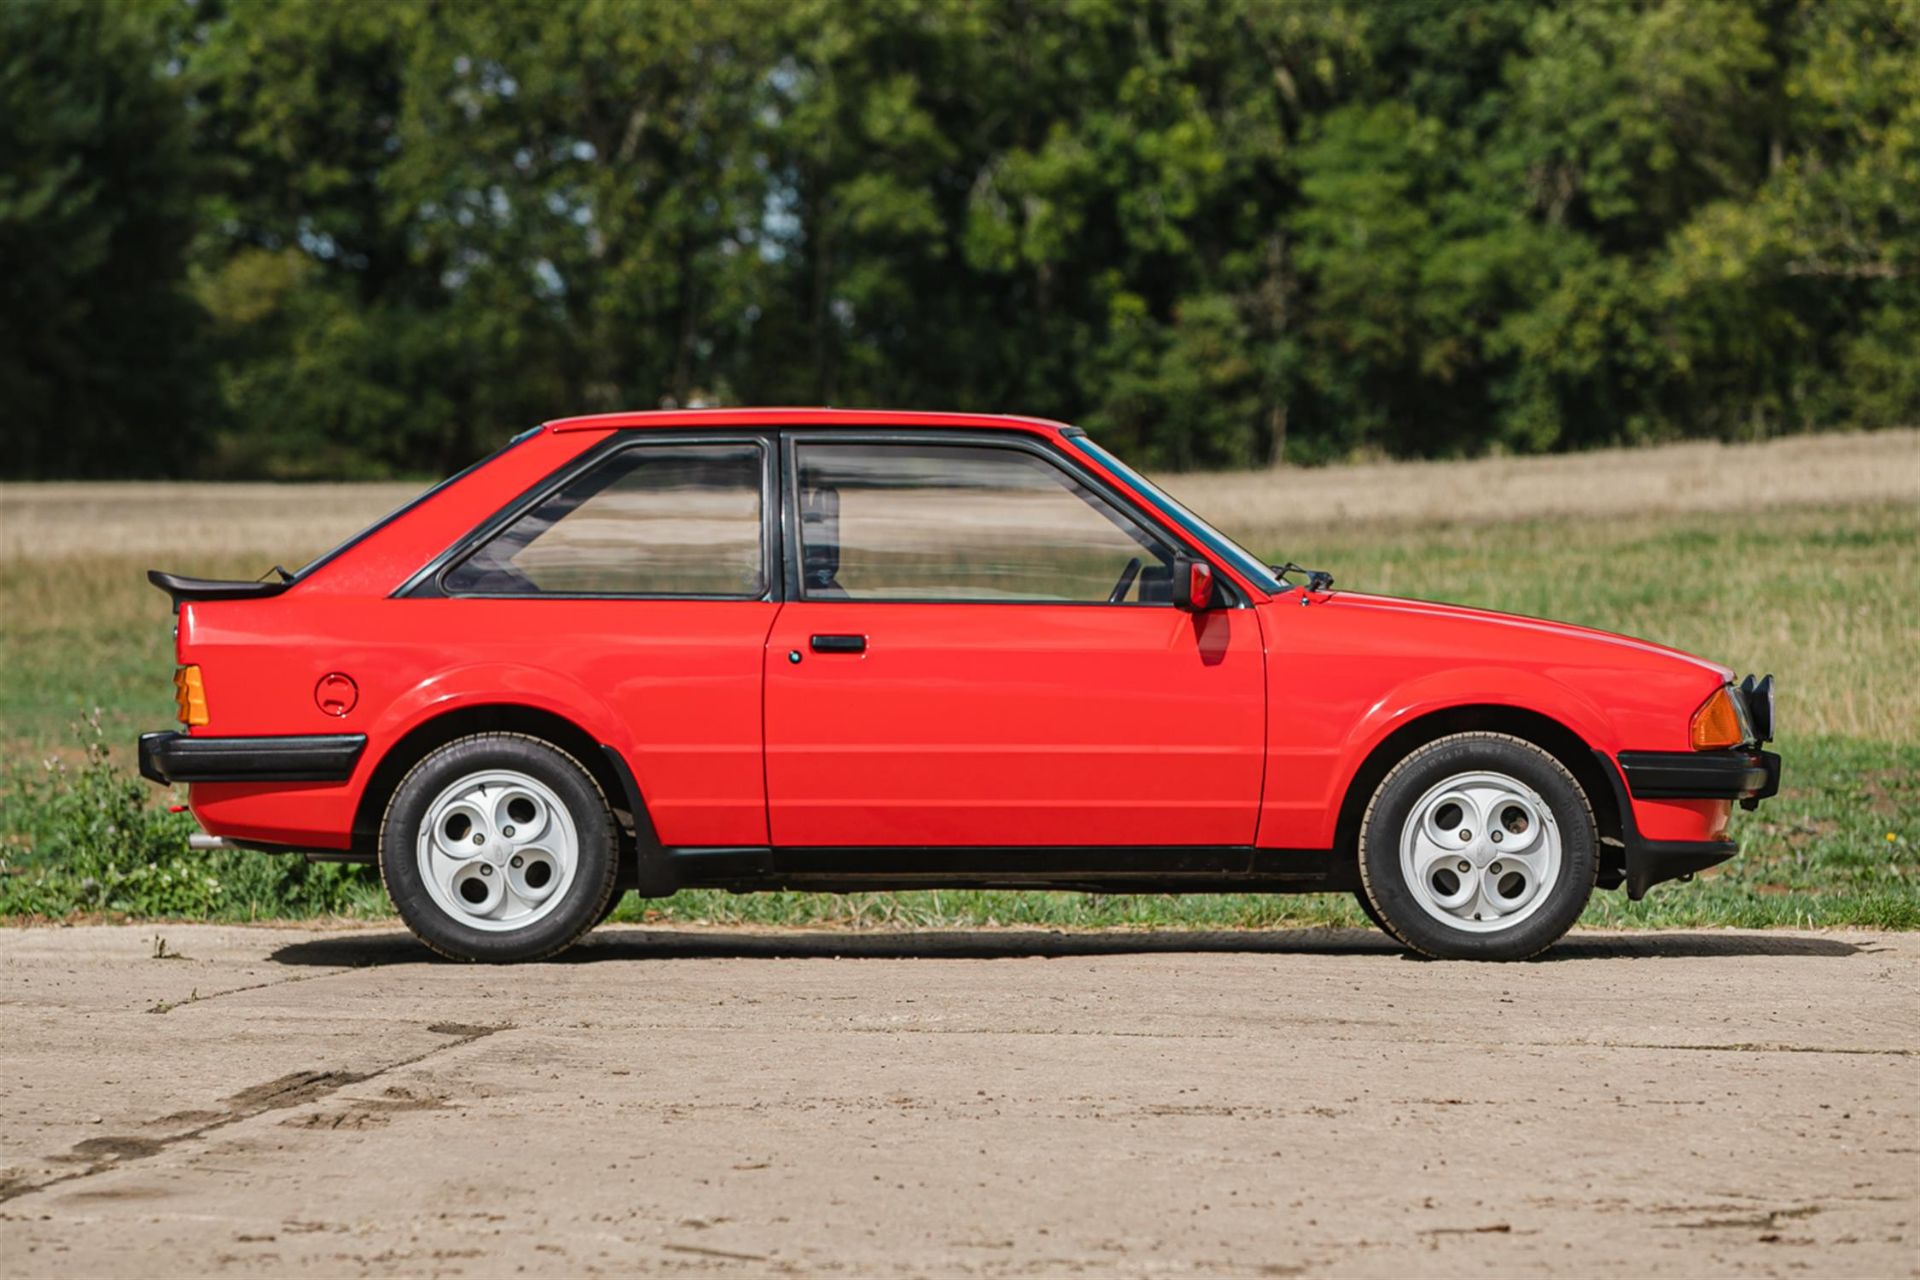 1982 Ford Escort XR3 - Image 4 of 10